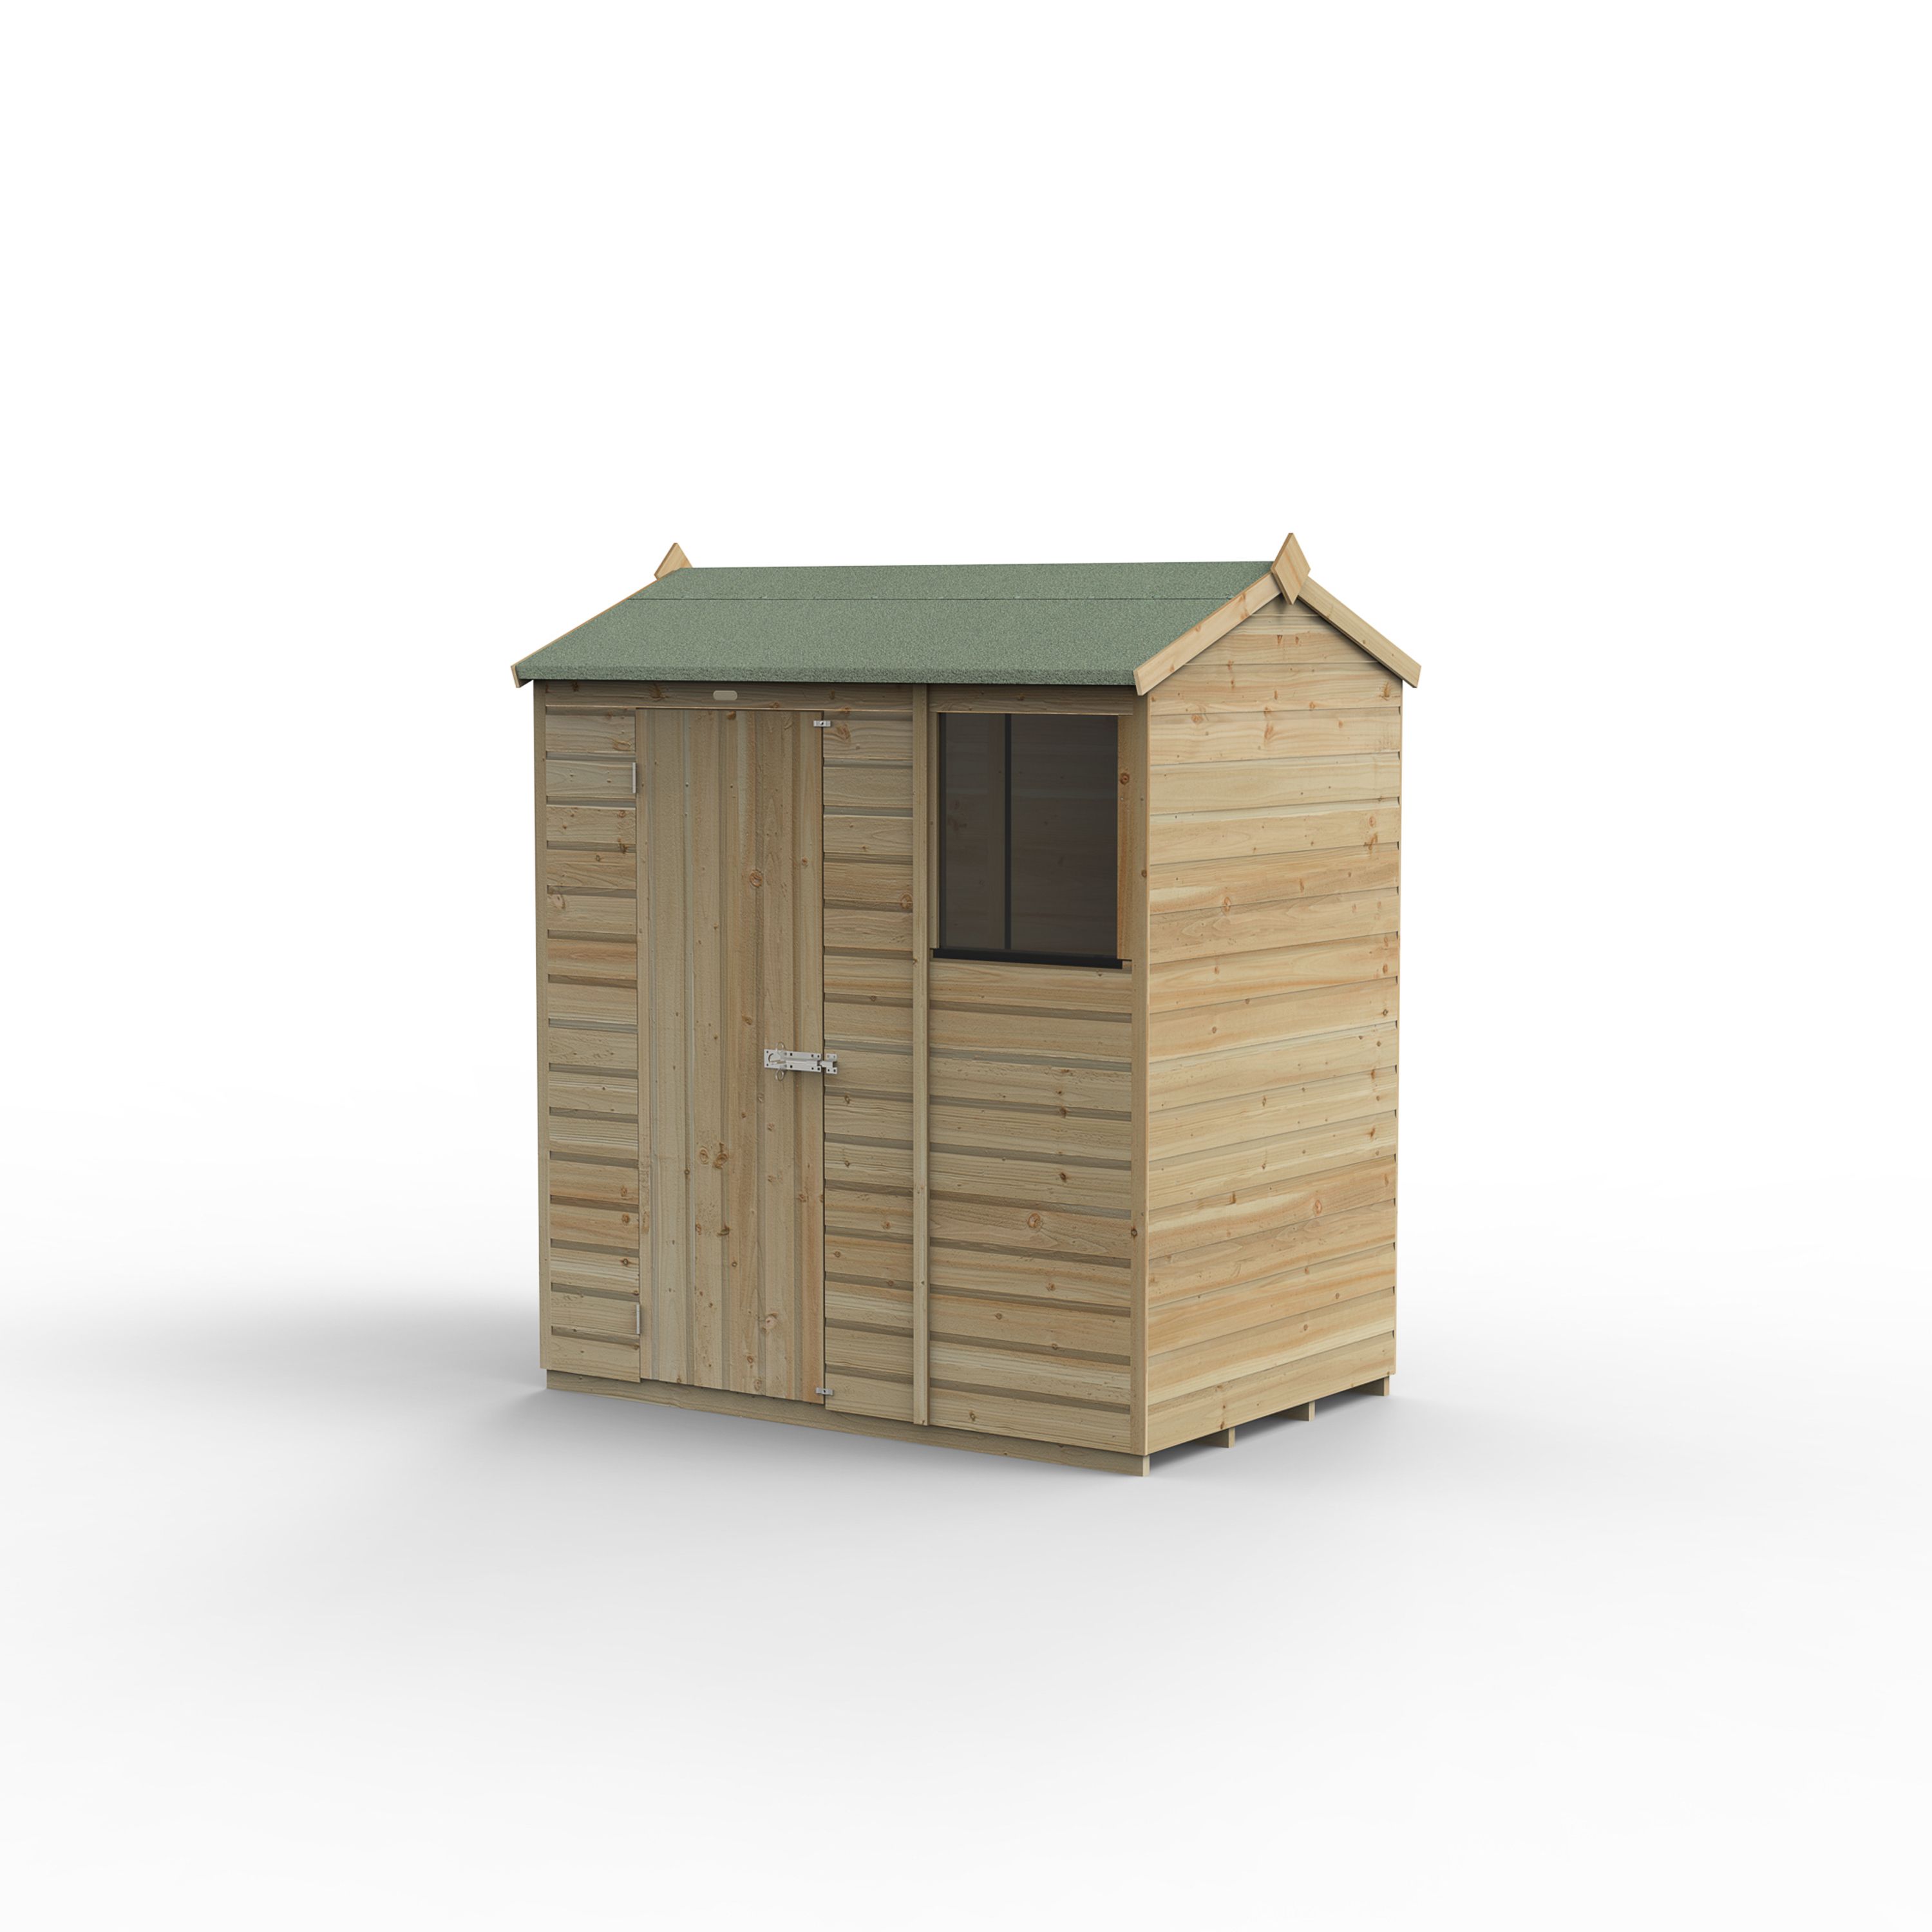 Forest Garden Beckwood 6x4 ft Reverse apex Natural timber Wooden Shed with floor & 1 window (Base included)